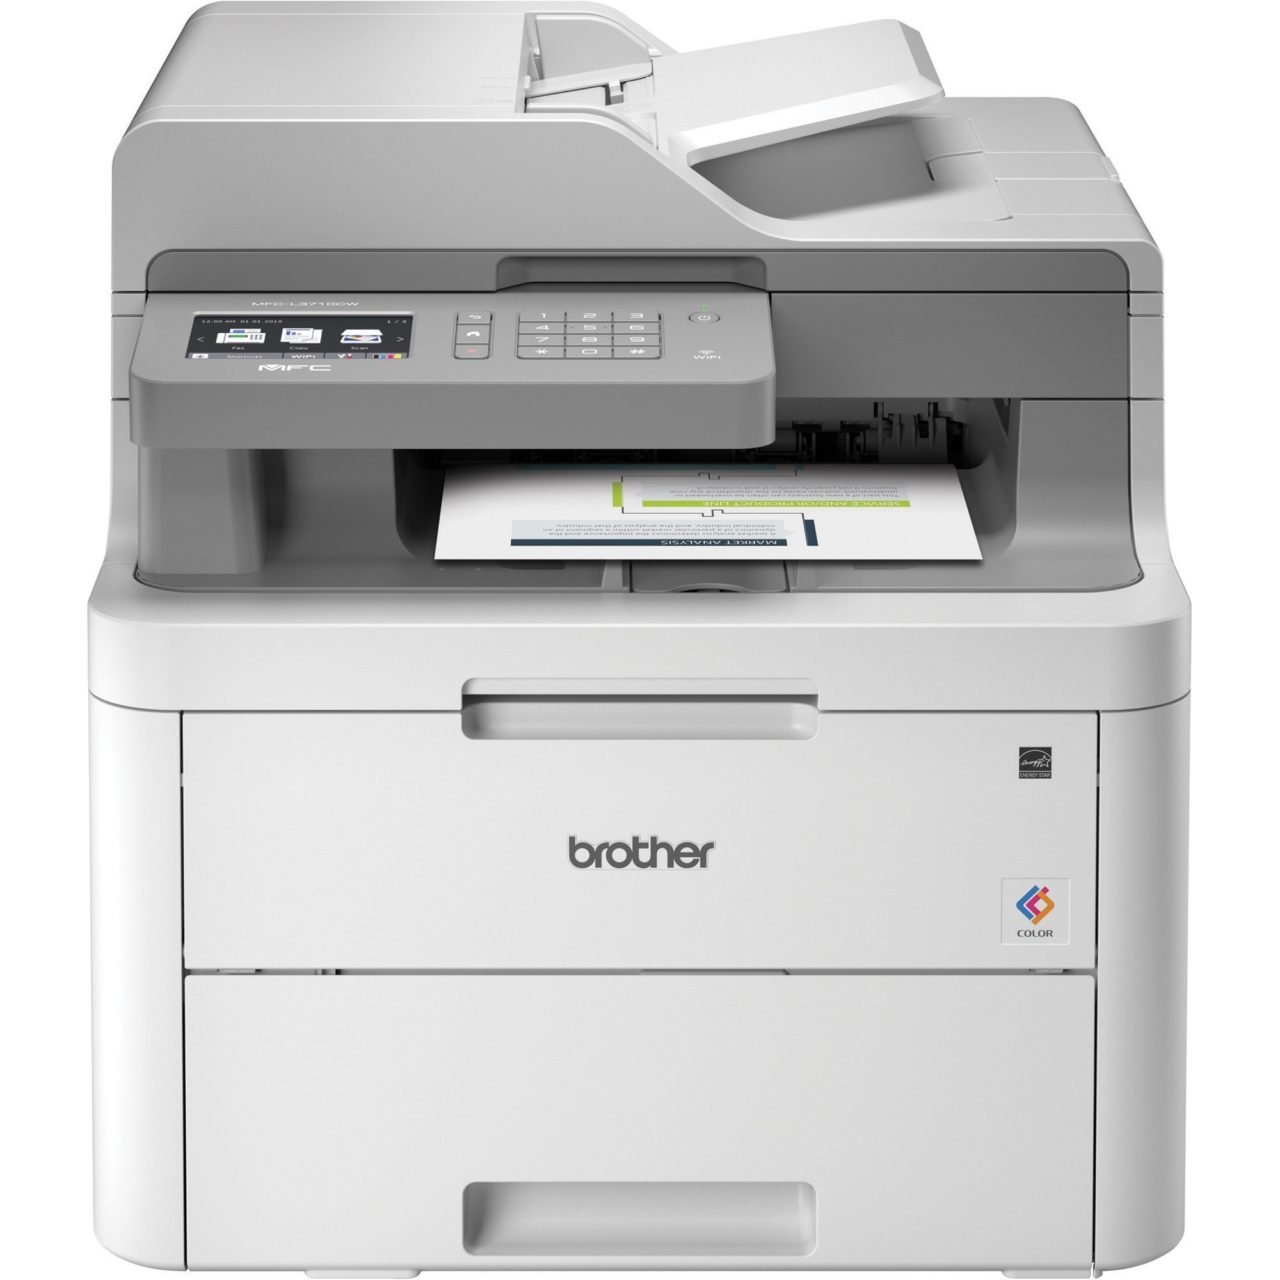 Brother MFC-L3710CW Compact Digital Color All-in-One Printer Providing